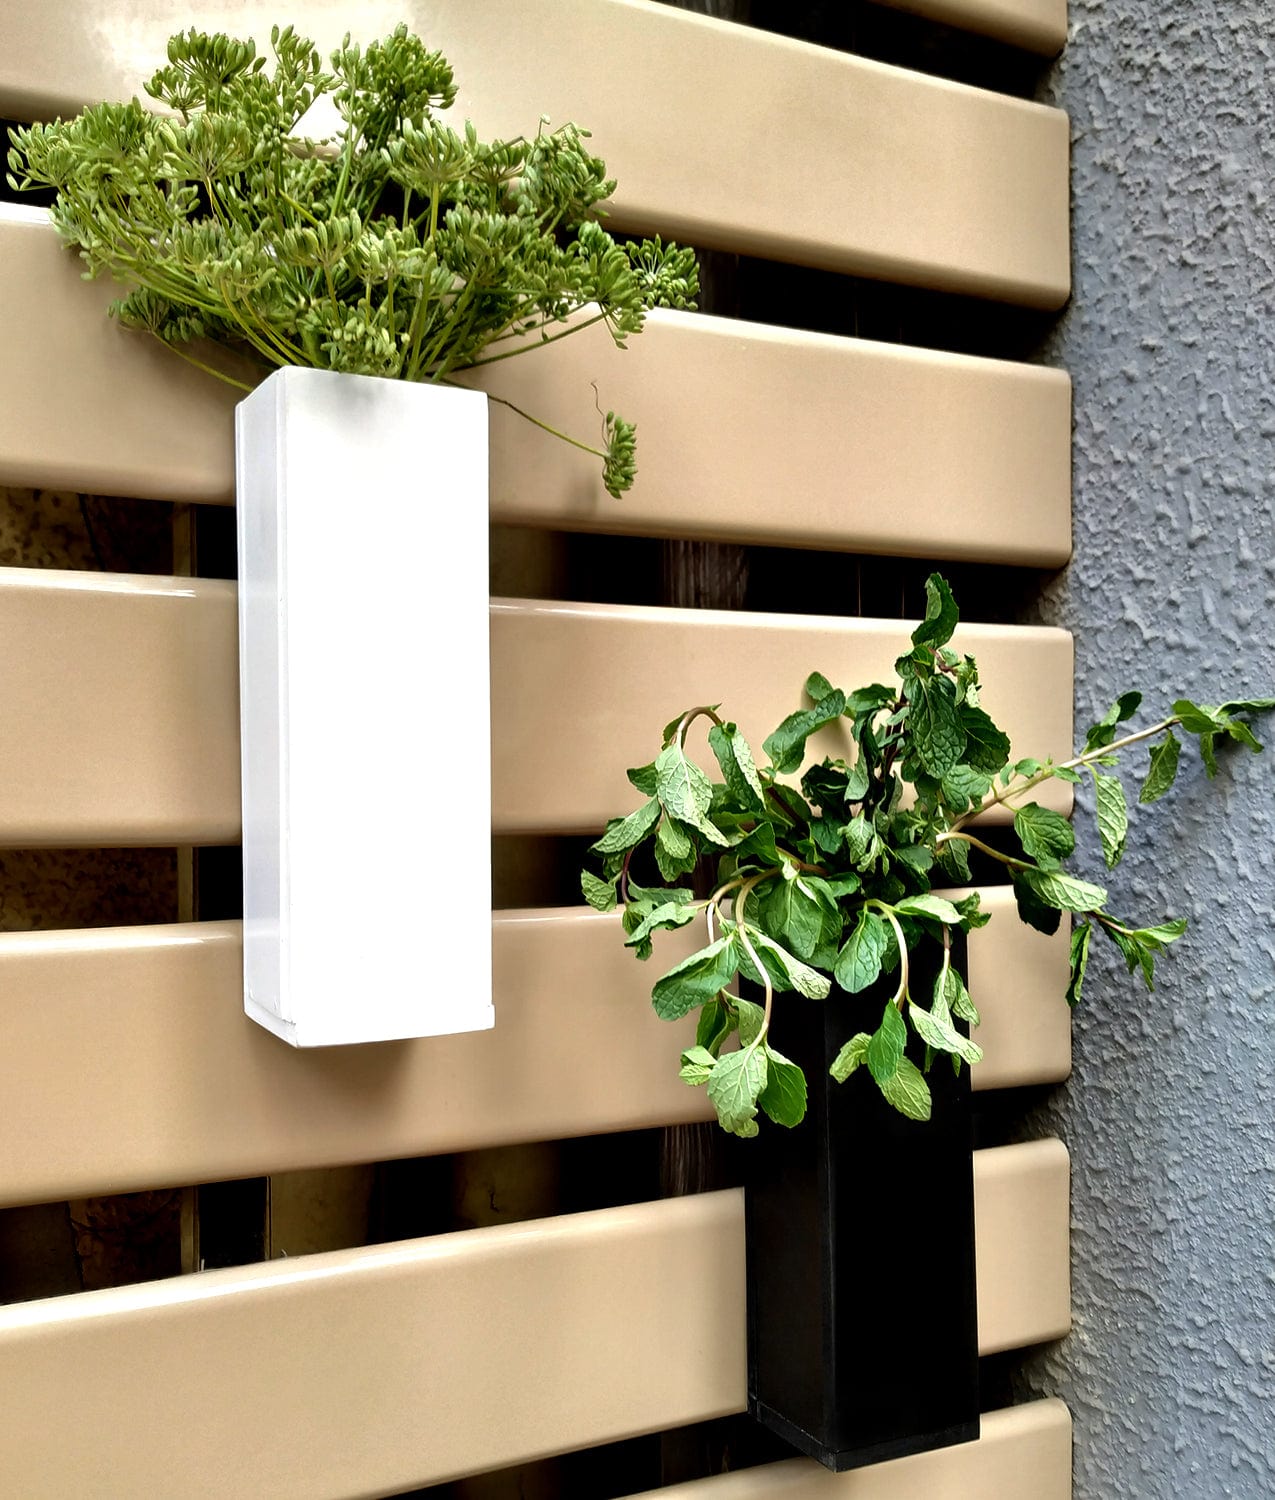 White and Black Magnetic Hydroponic or Artificial Plants Holders